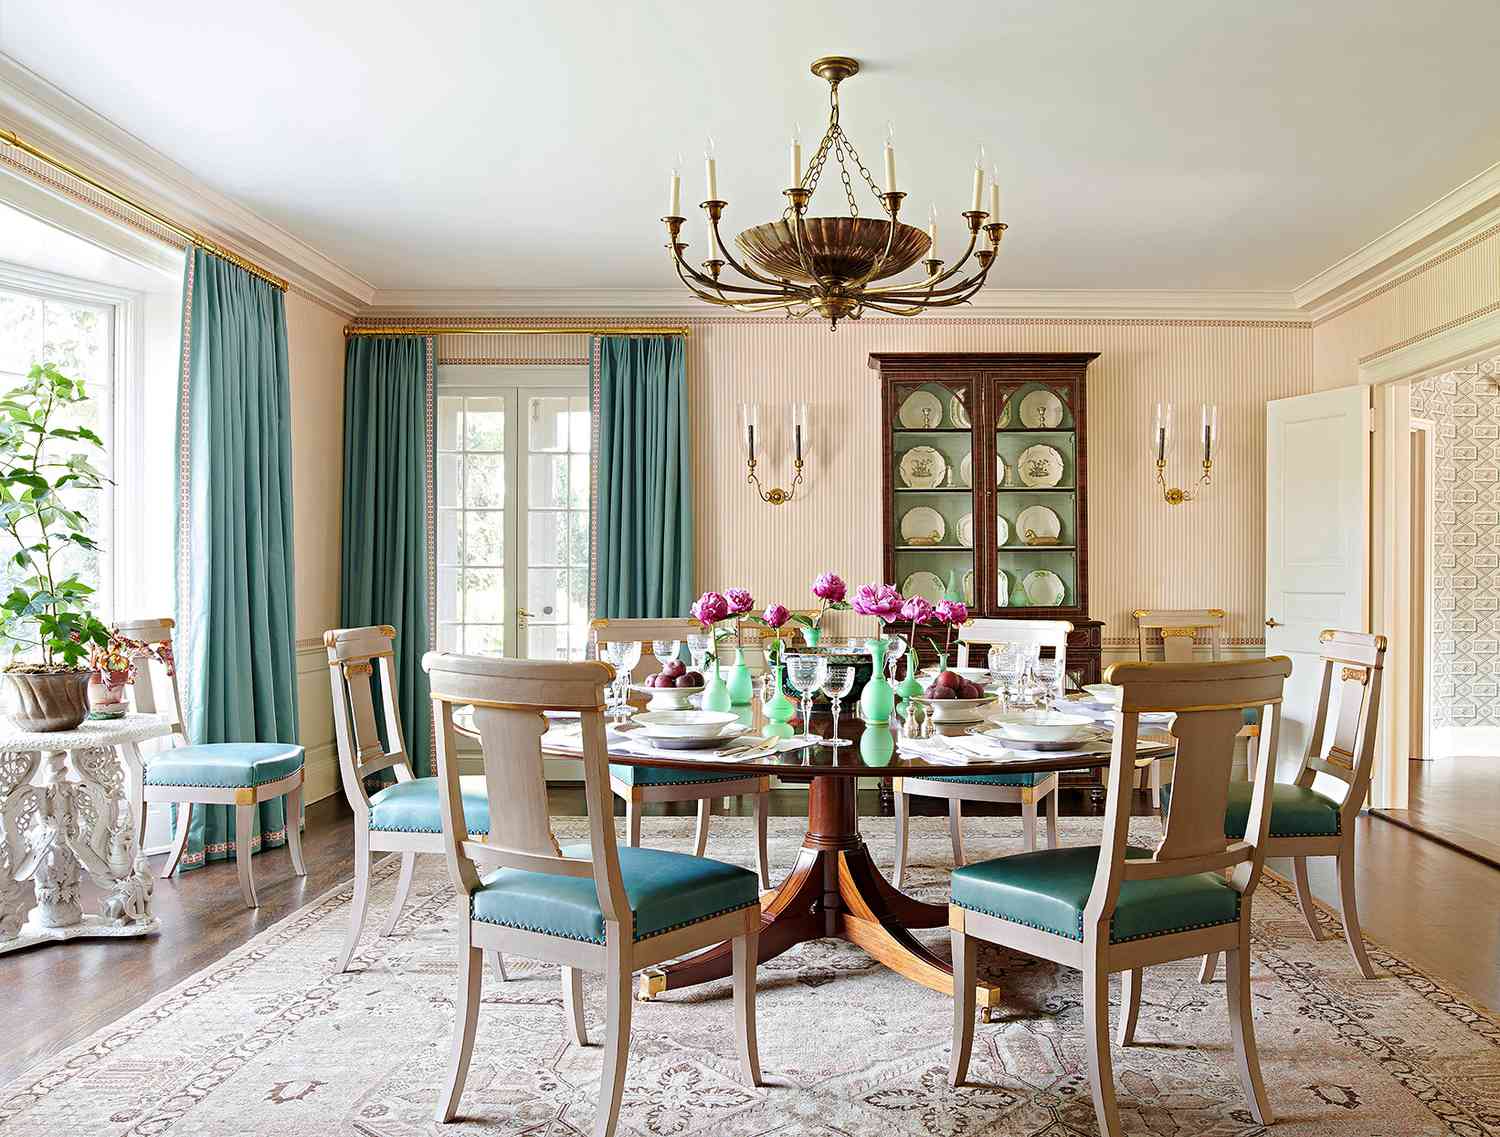 teal draperies in dining room with china cabinet